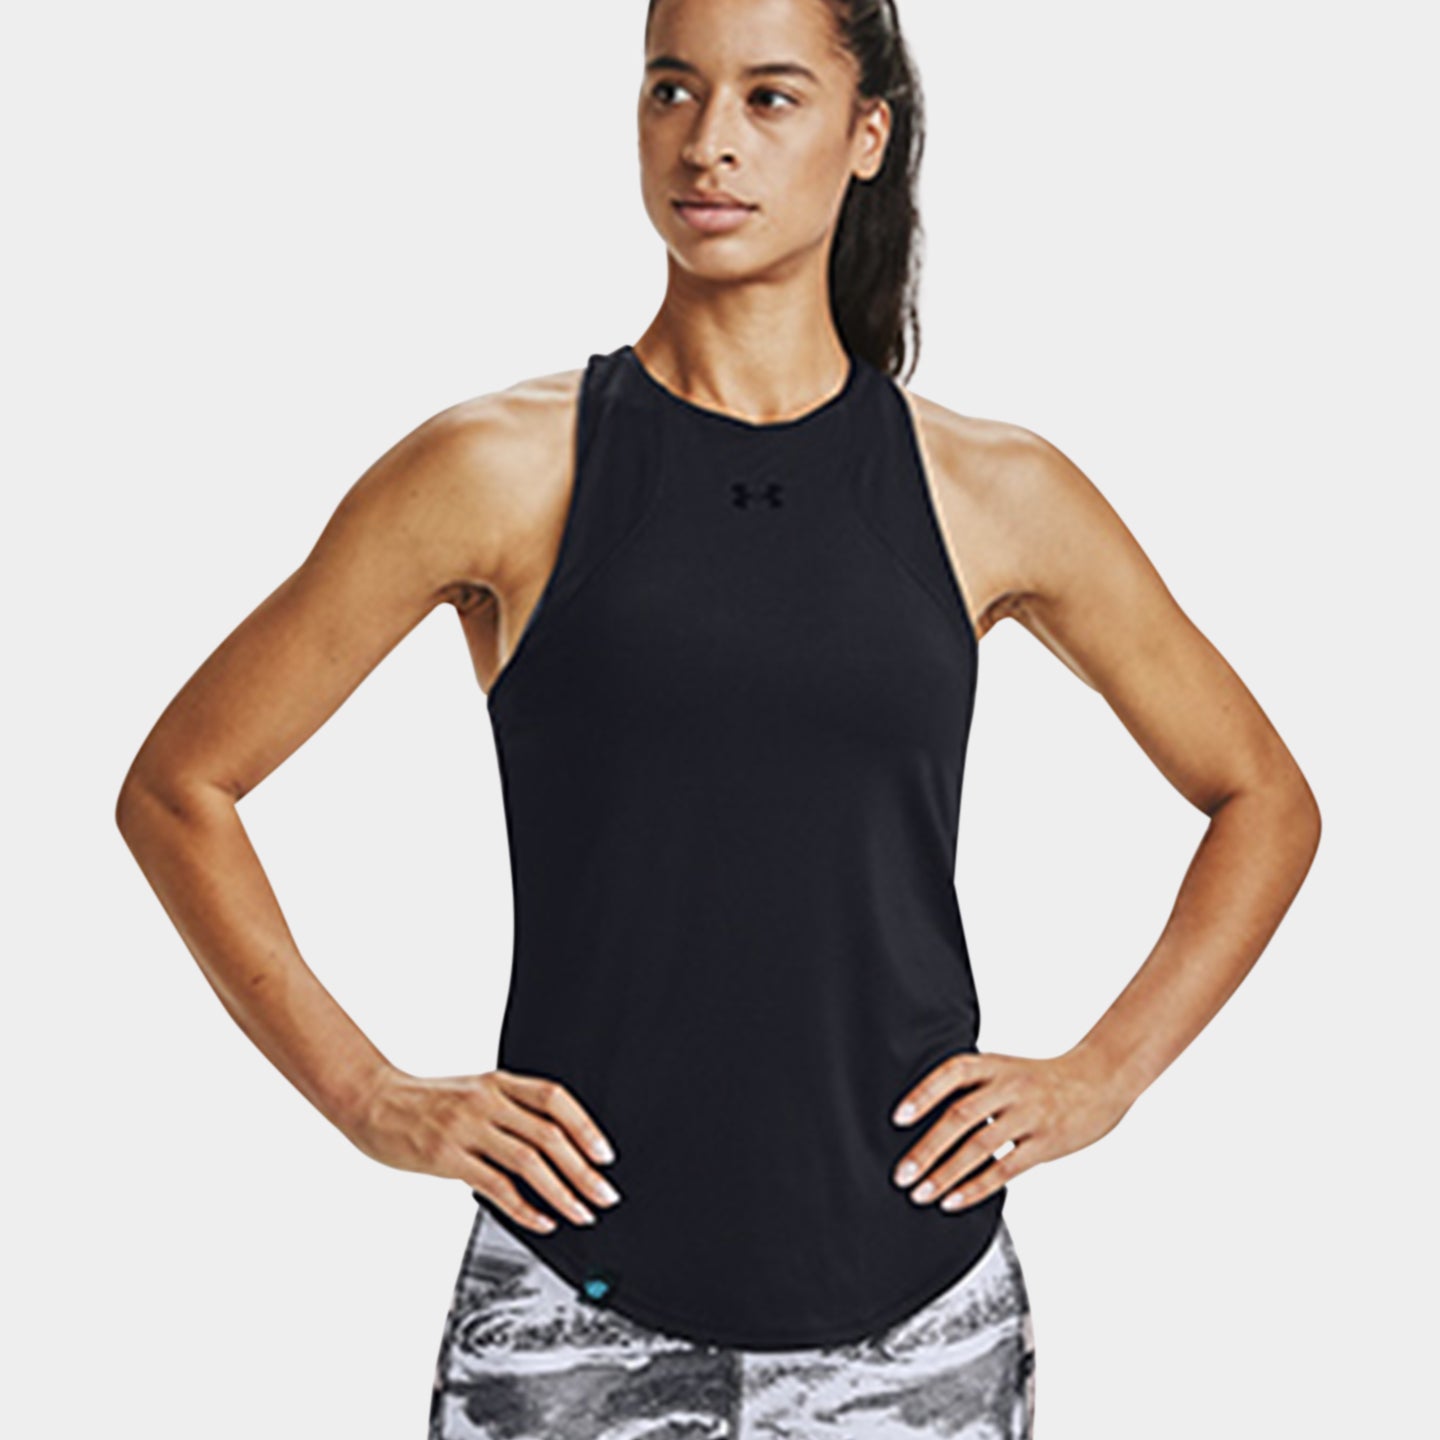 Under Armour Women's UA Armour Sport 2-in-1 Tank, Black, Large